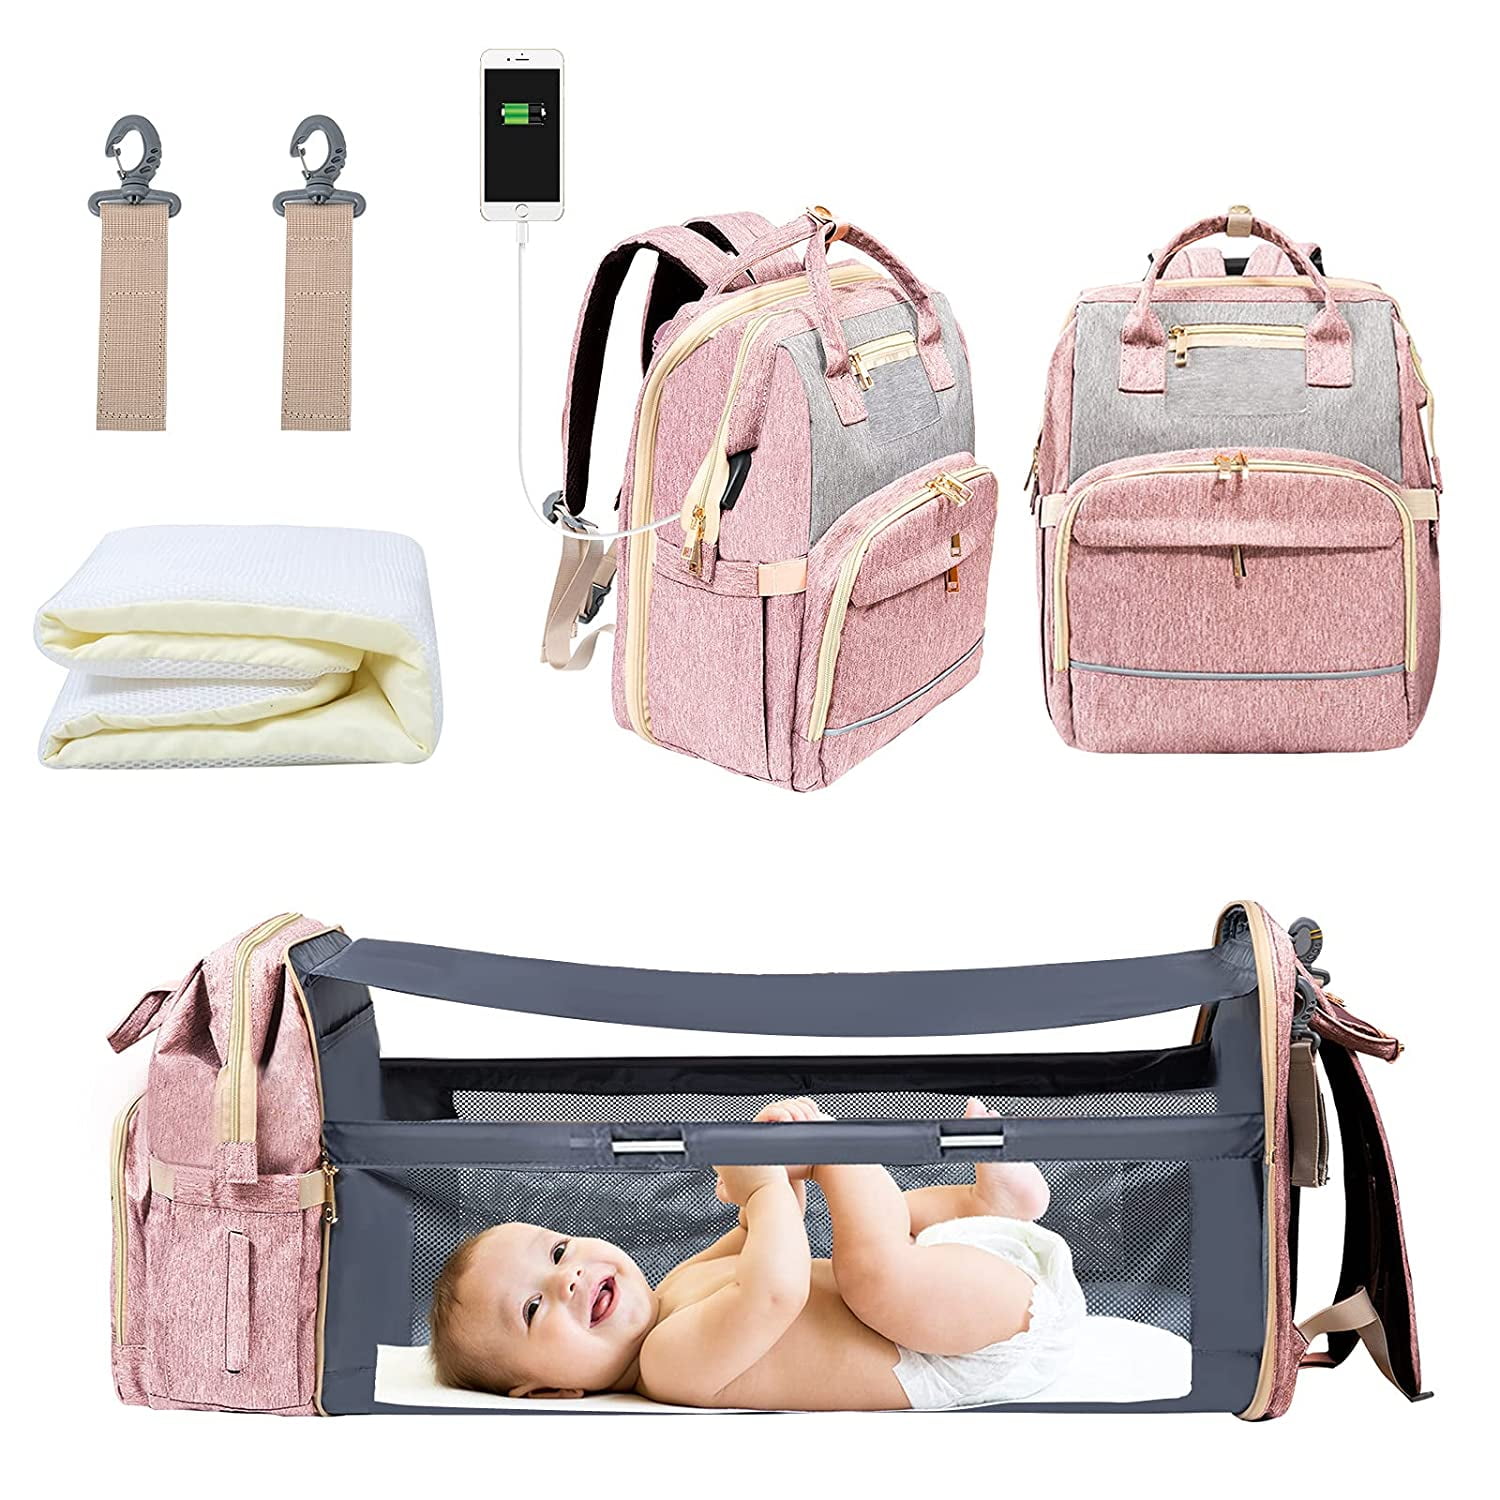 Diaper Bag Backpack Baby Bag with Changing Station Portable Mommy Bag Foldable Crib Large Capacity Multifunctional Nappy Bag with USB Charge Port Baby Bassinet Travel Bag for Boy&Girl Gray 